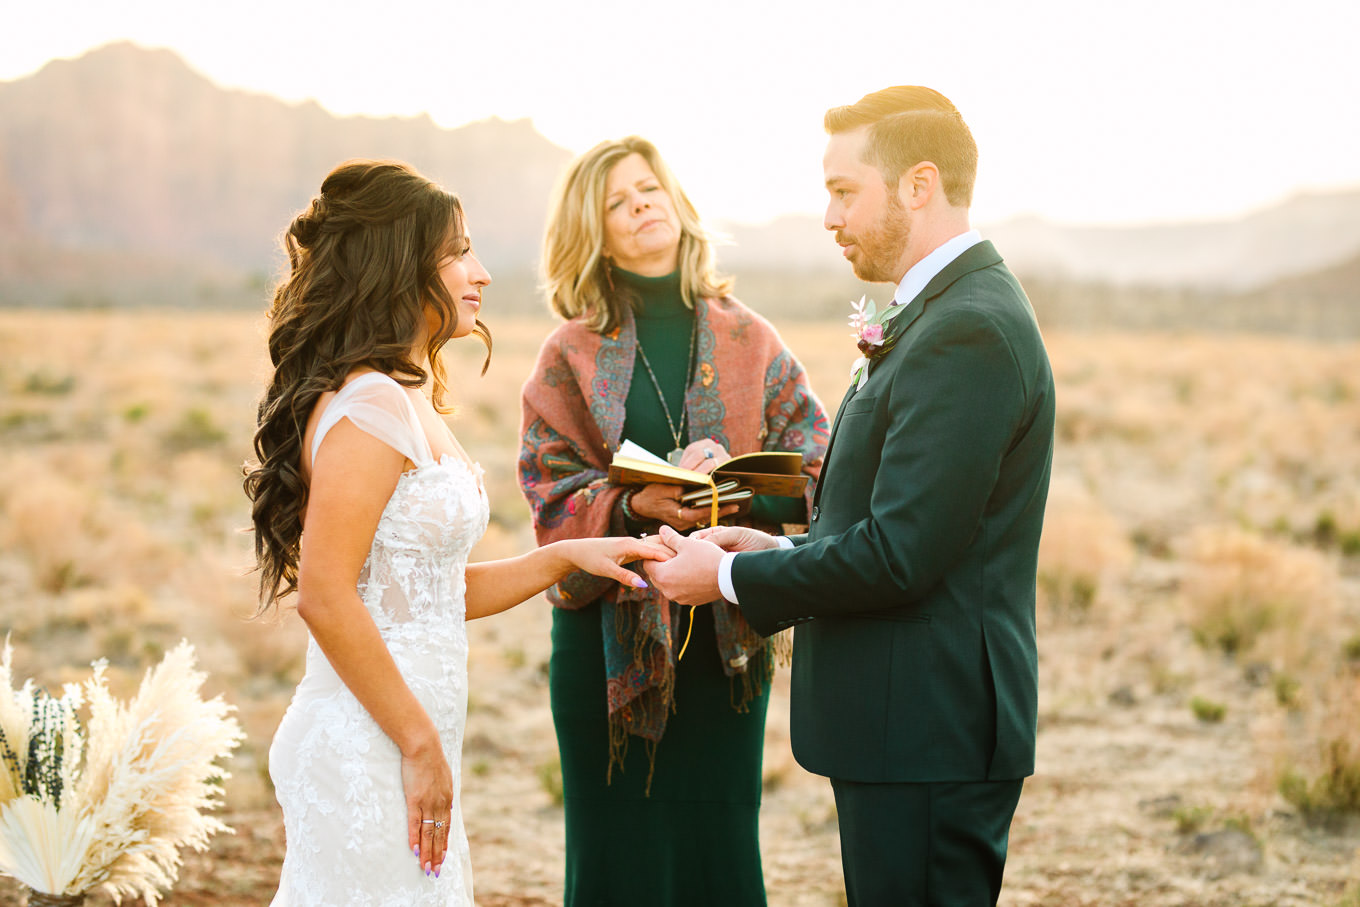 Bride and groom wedding ring exchange | Zion Under Canvas camping elopement at sunrise | Colorful elopement photography | #utahelopement #zionelopement #zionwedding #undercanvaszion #sunriseelopement #adventureelopement  Source: Mary Costa Photography | Los Angeles